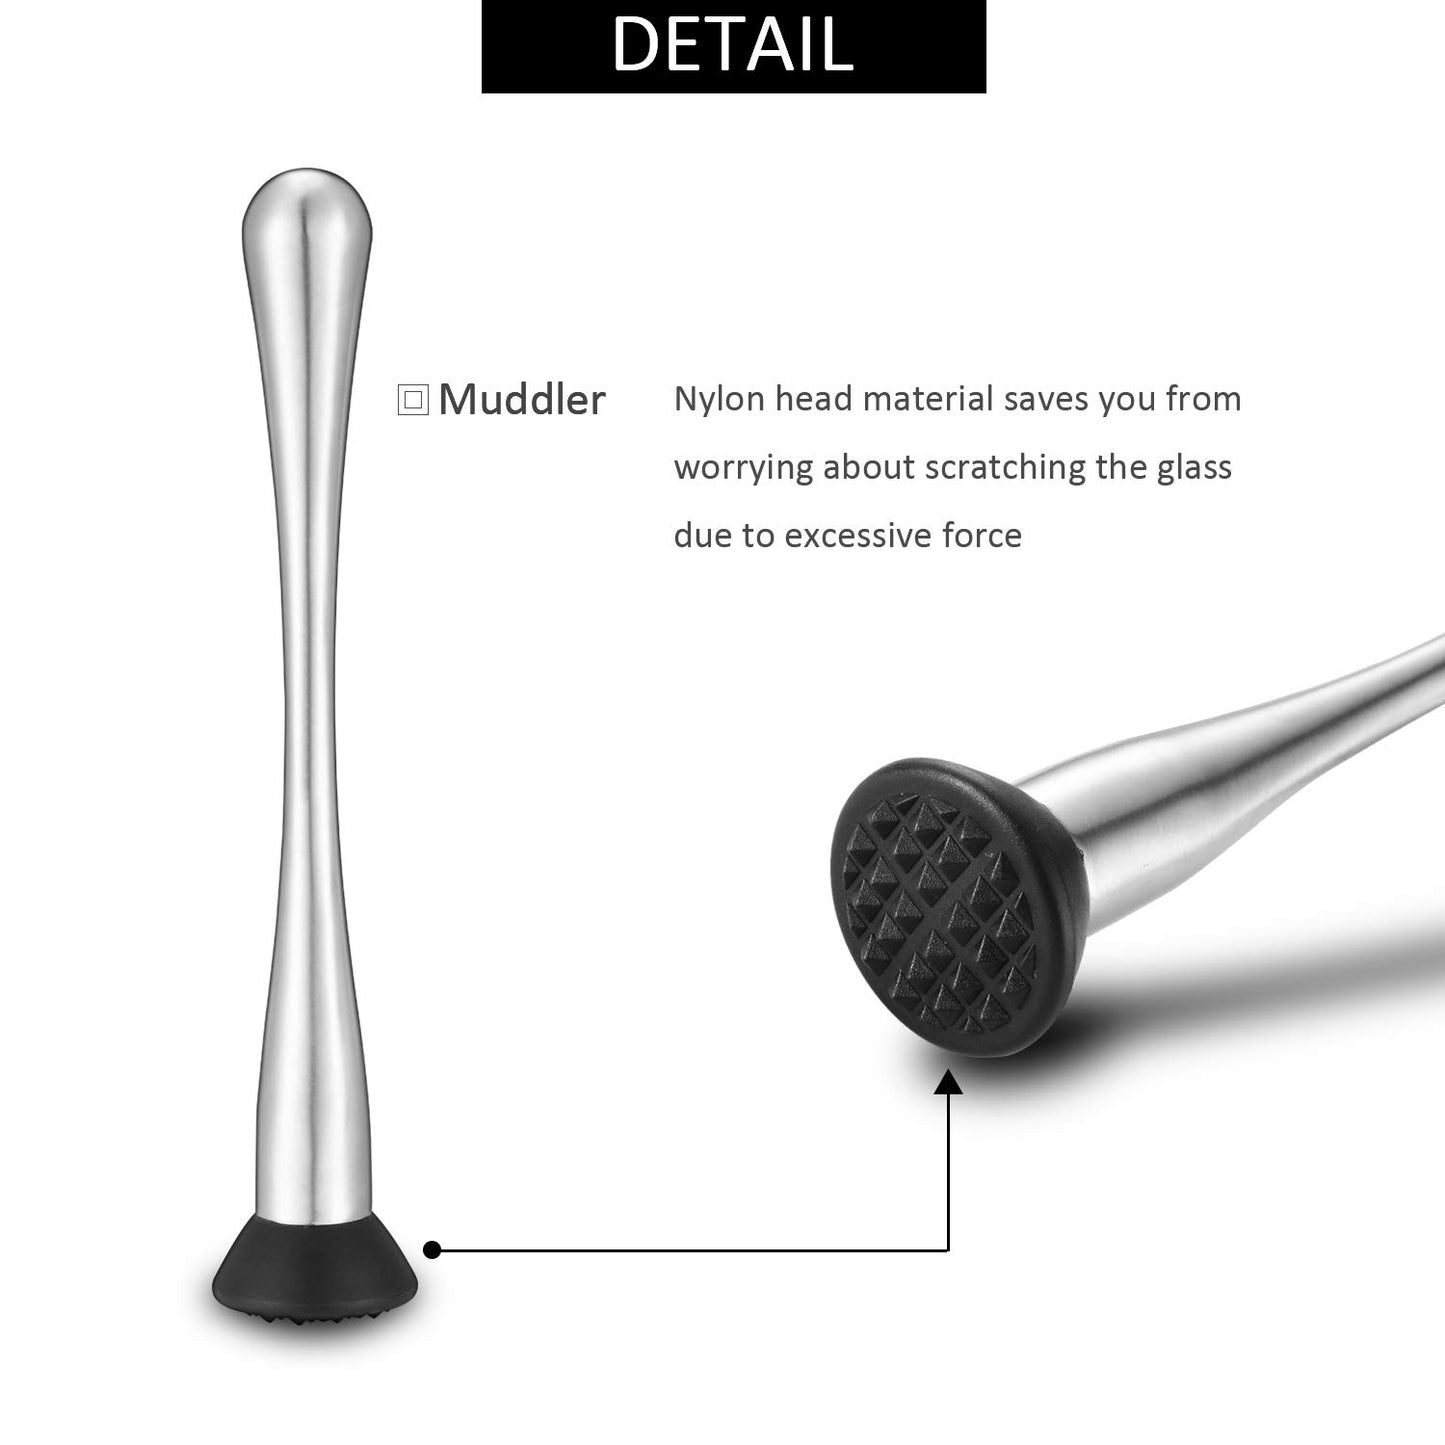 Stainless Steel Muddler for Cocktails,Mixing Spoon and Measuring Jigger,Professional Bar Tools,10-inch Bar Muddler for Making Mojitos,Margaritas and Other Fruit Based Drinks.